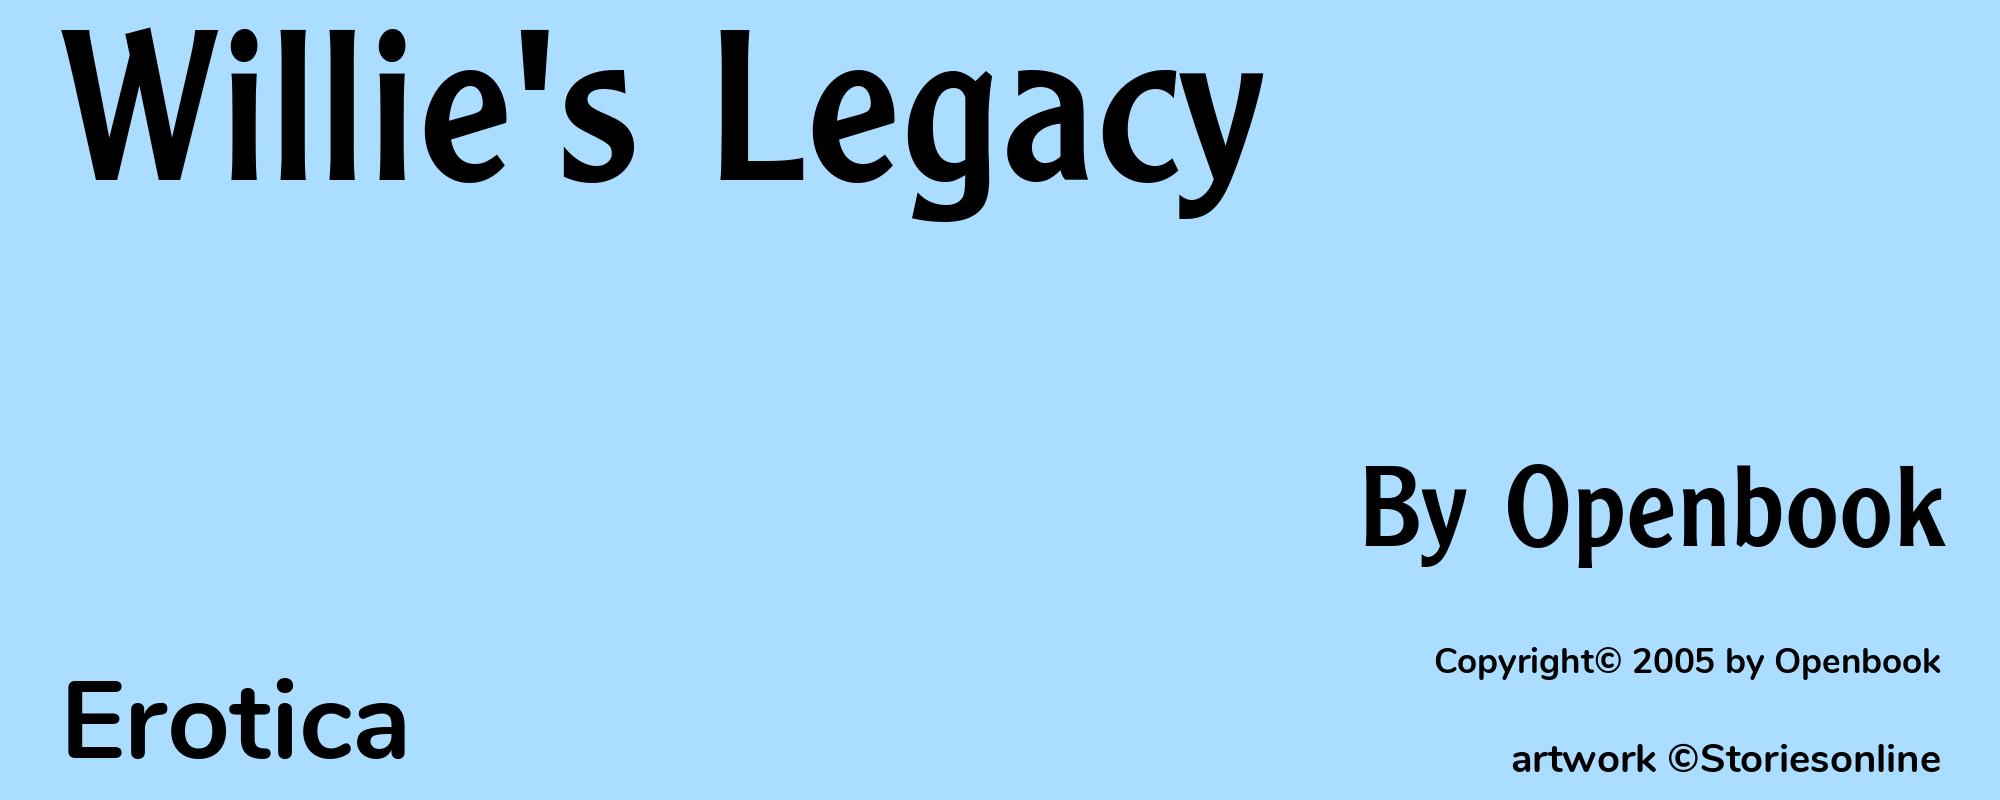 Willie's Legacy - Cover